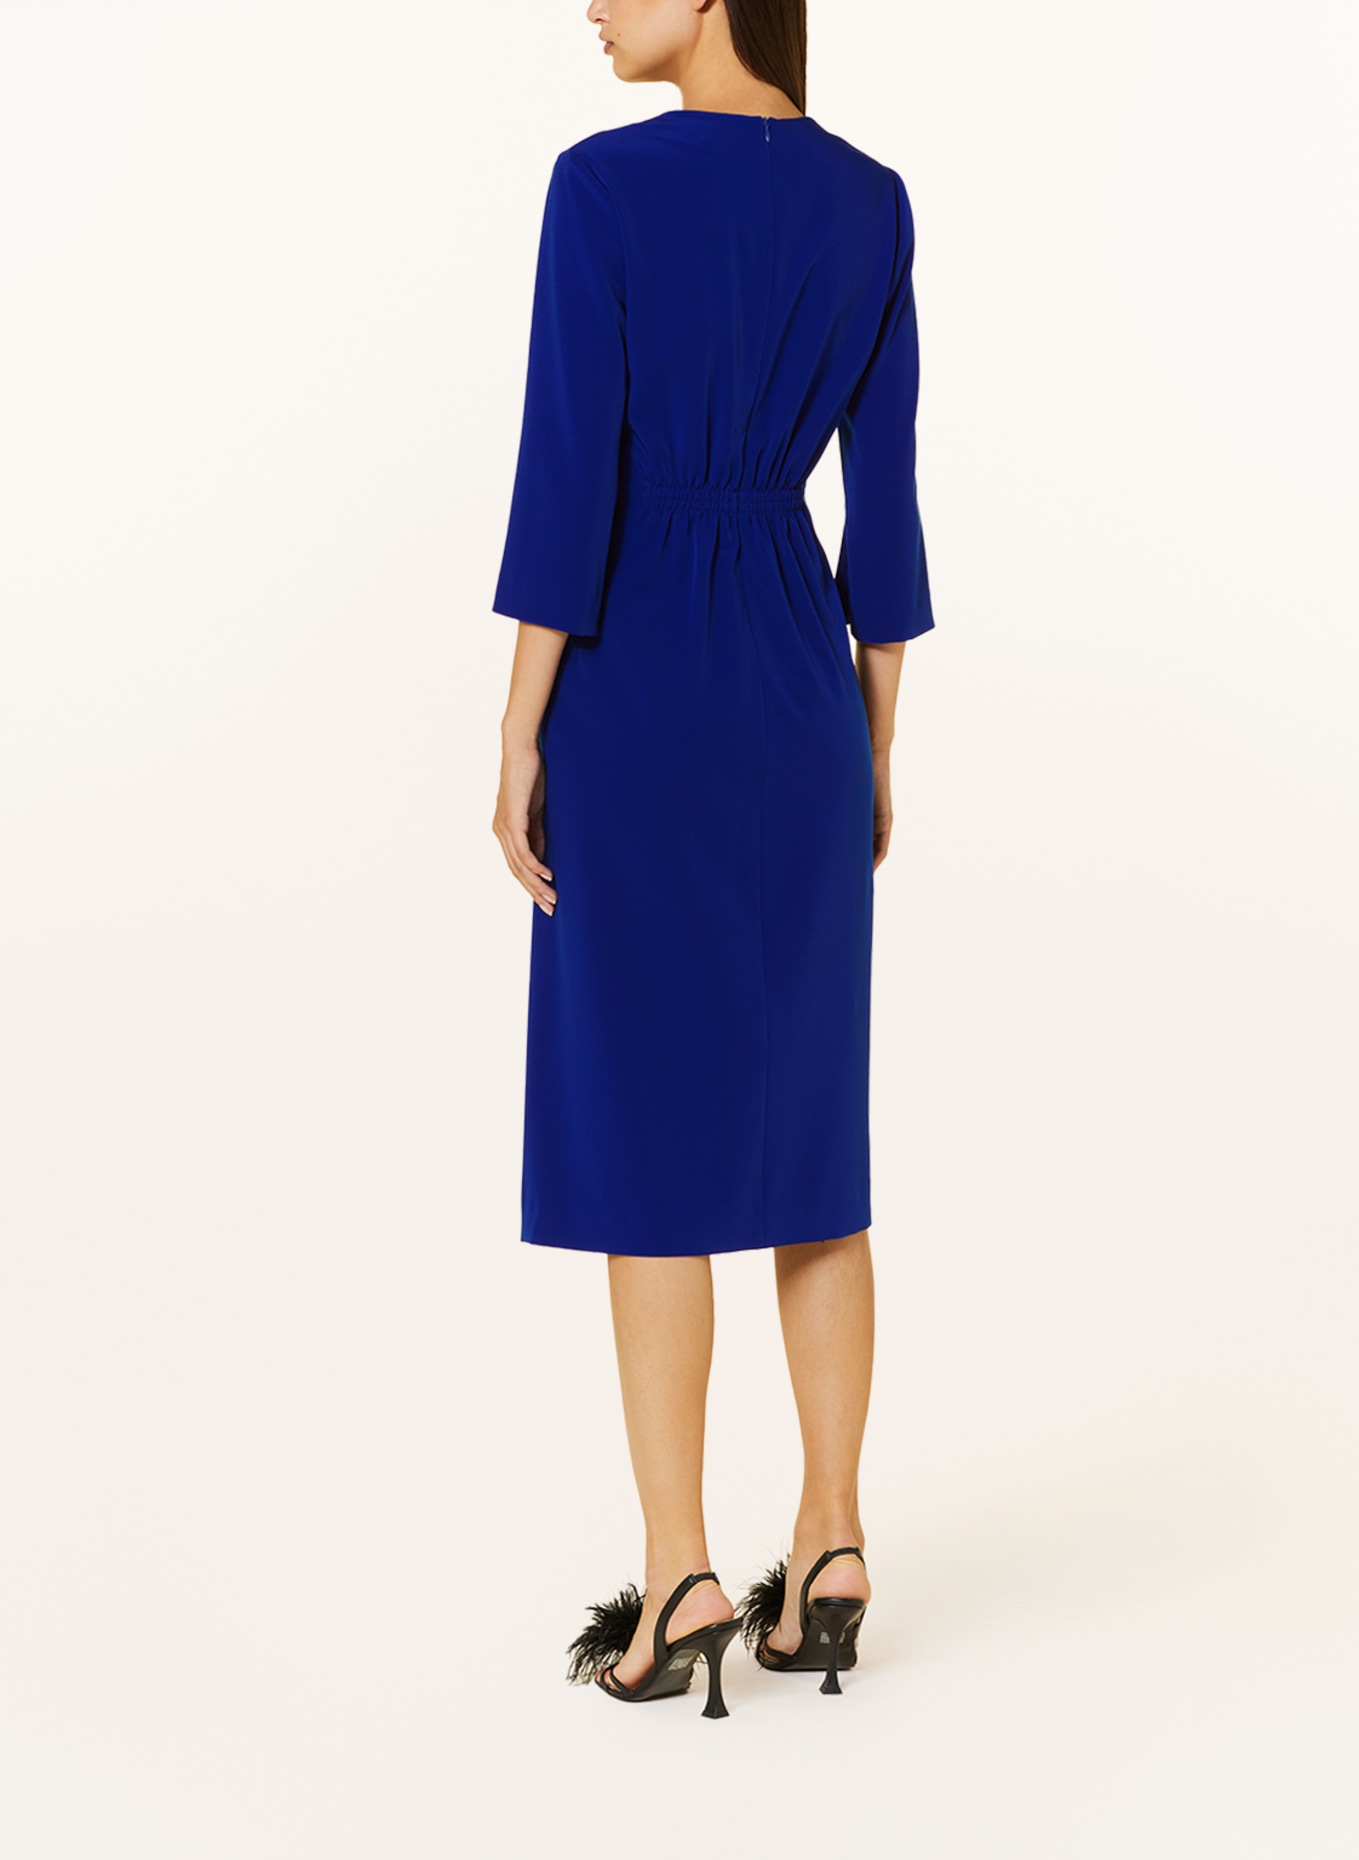 RIANI Dress with 3/4 sleeves, Color: BLUE (Image 3)